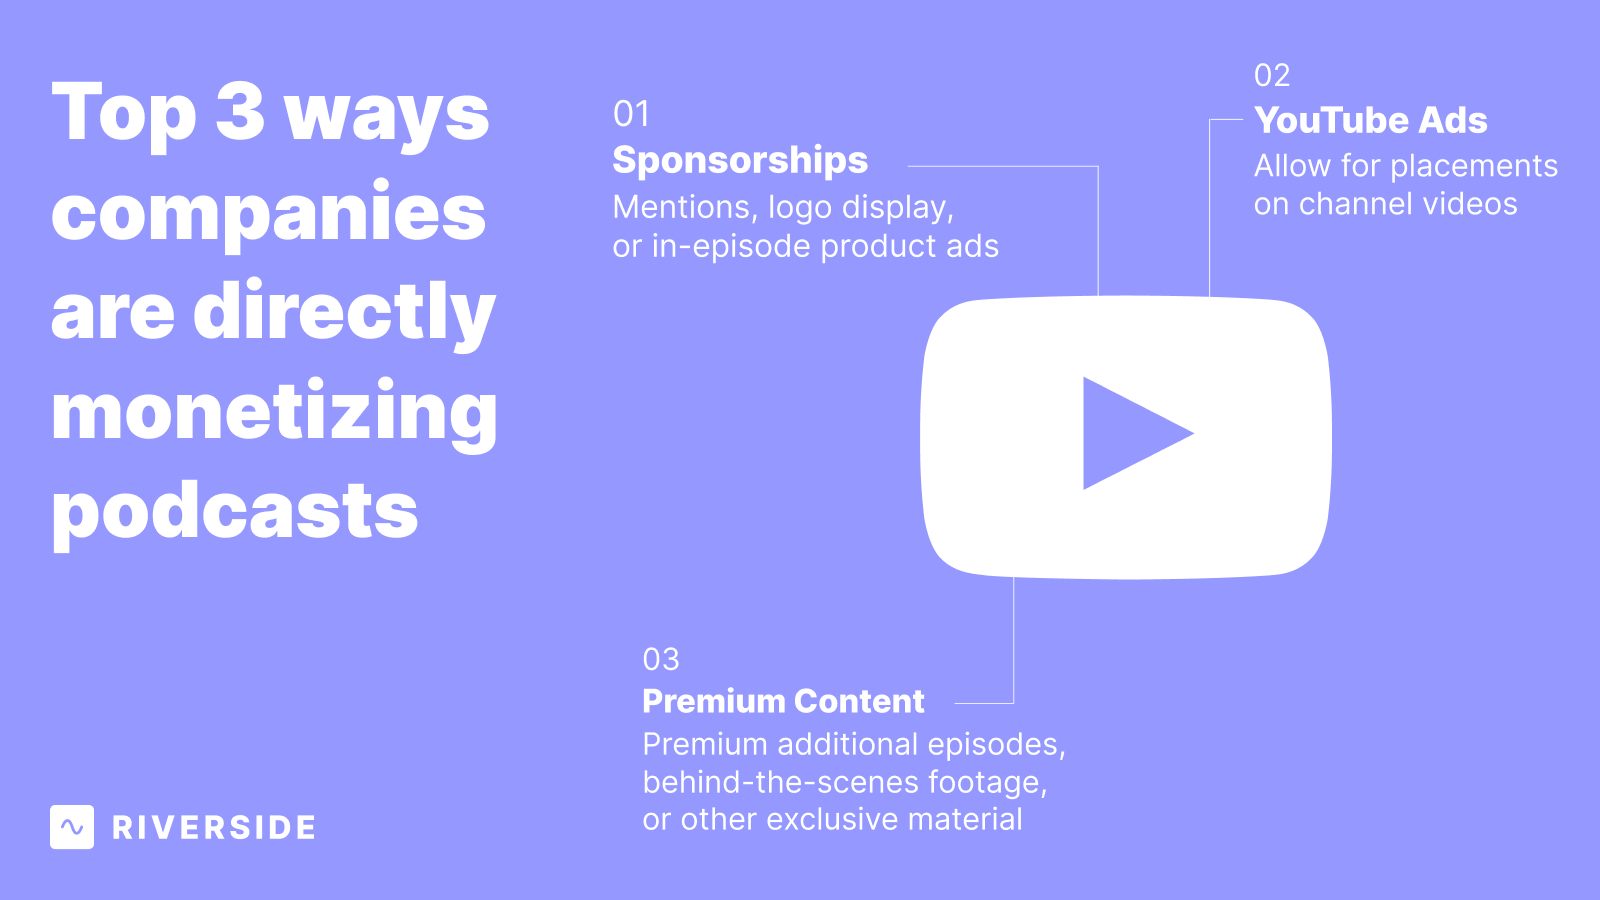 Top 3 ways companies are monetizing video podcasts